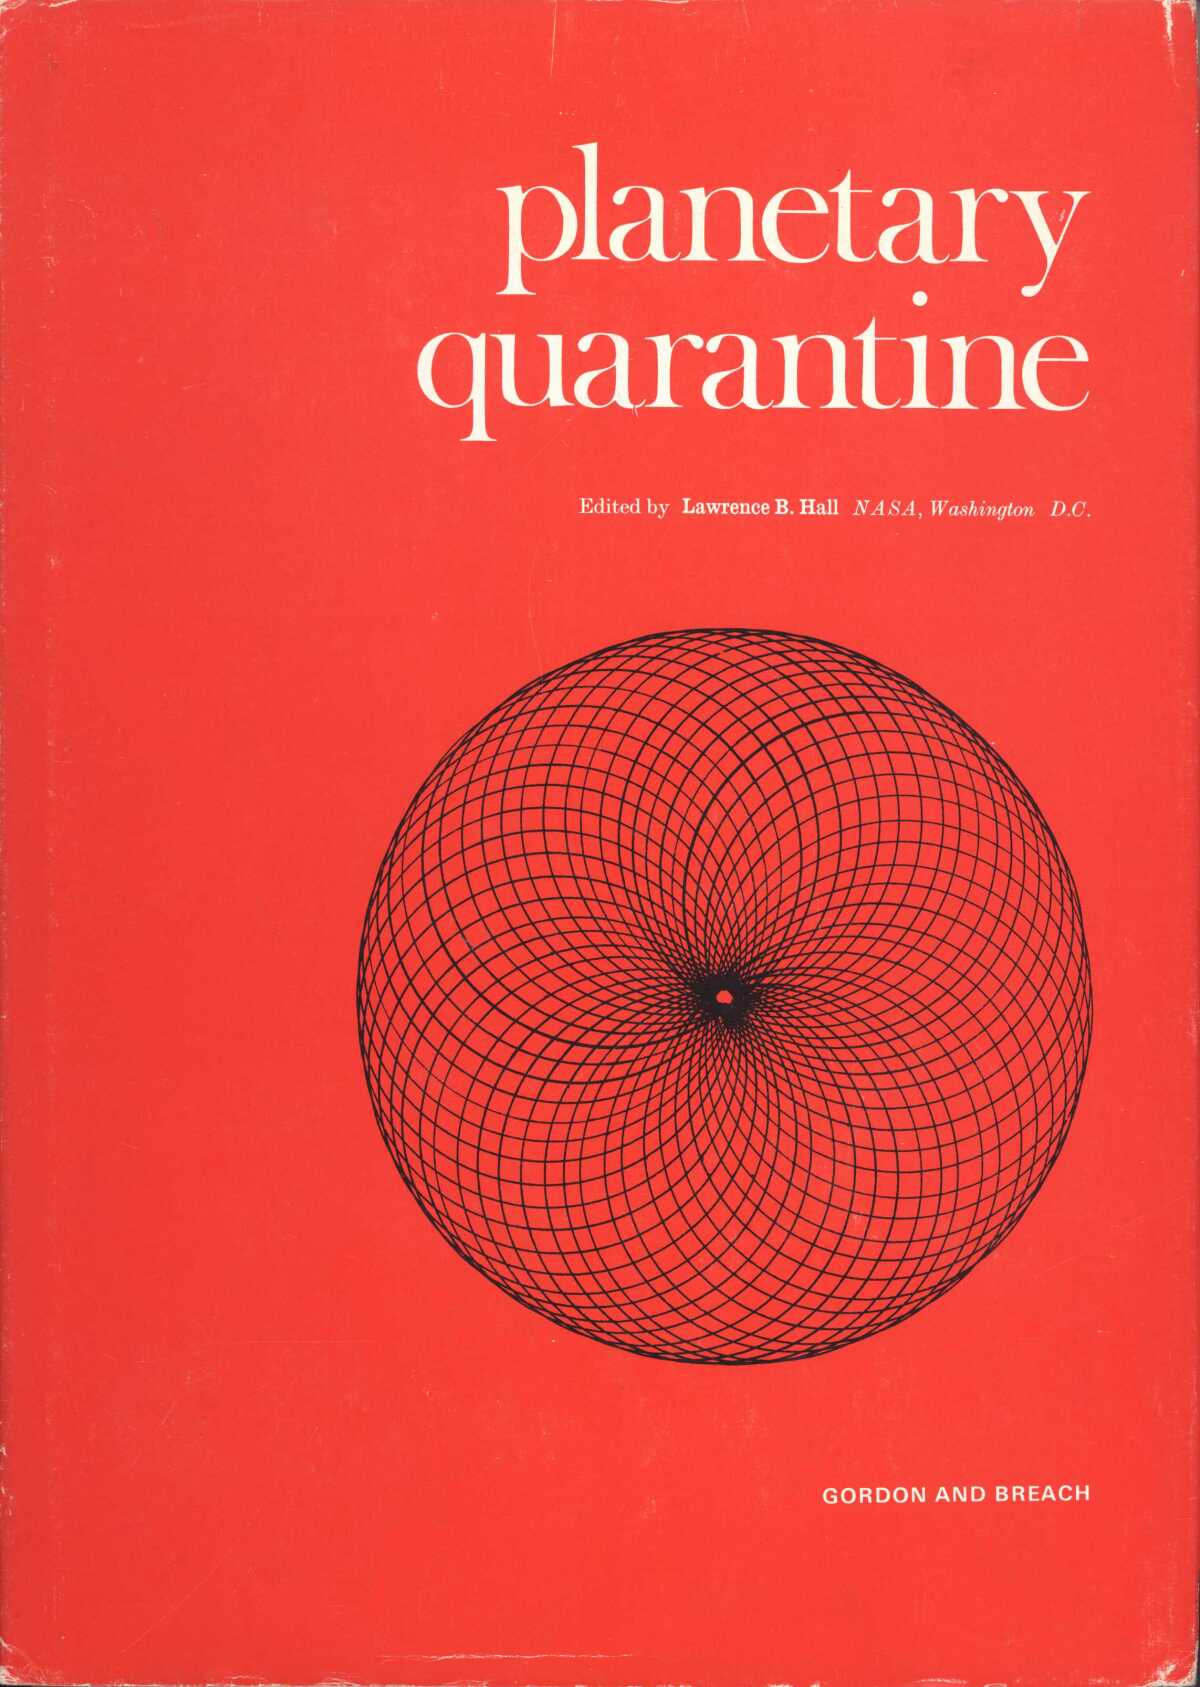 This 1971 book, picked up in a hallway giveaway, traces the history of quarantine.